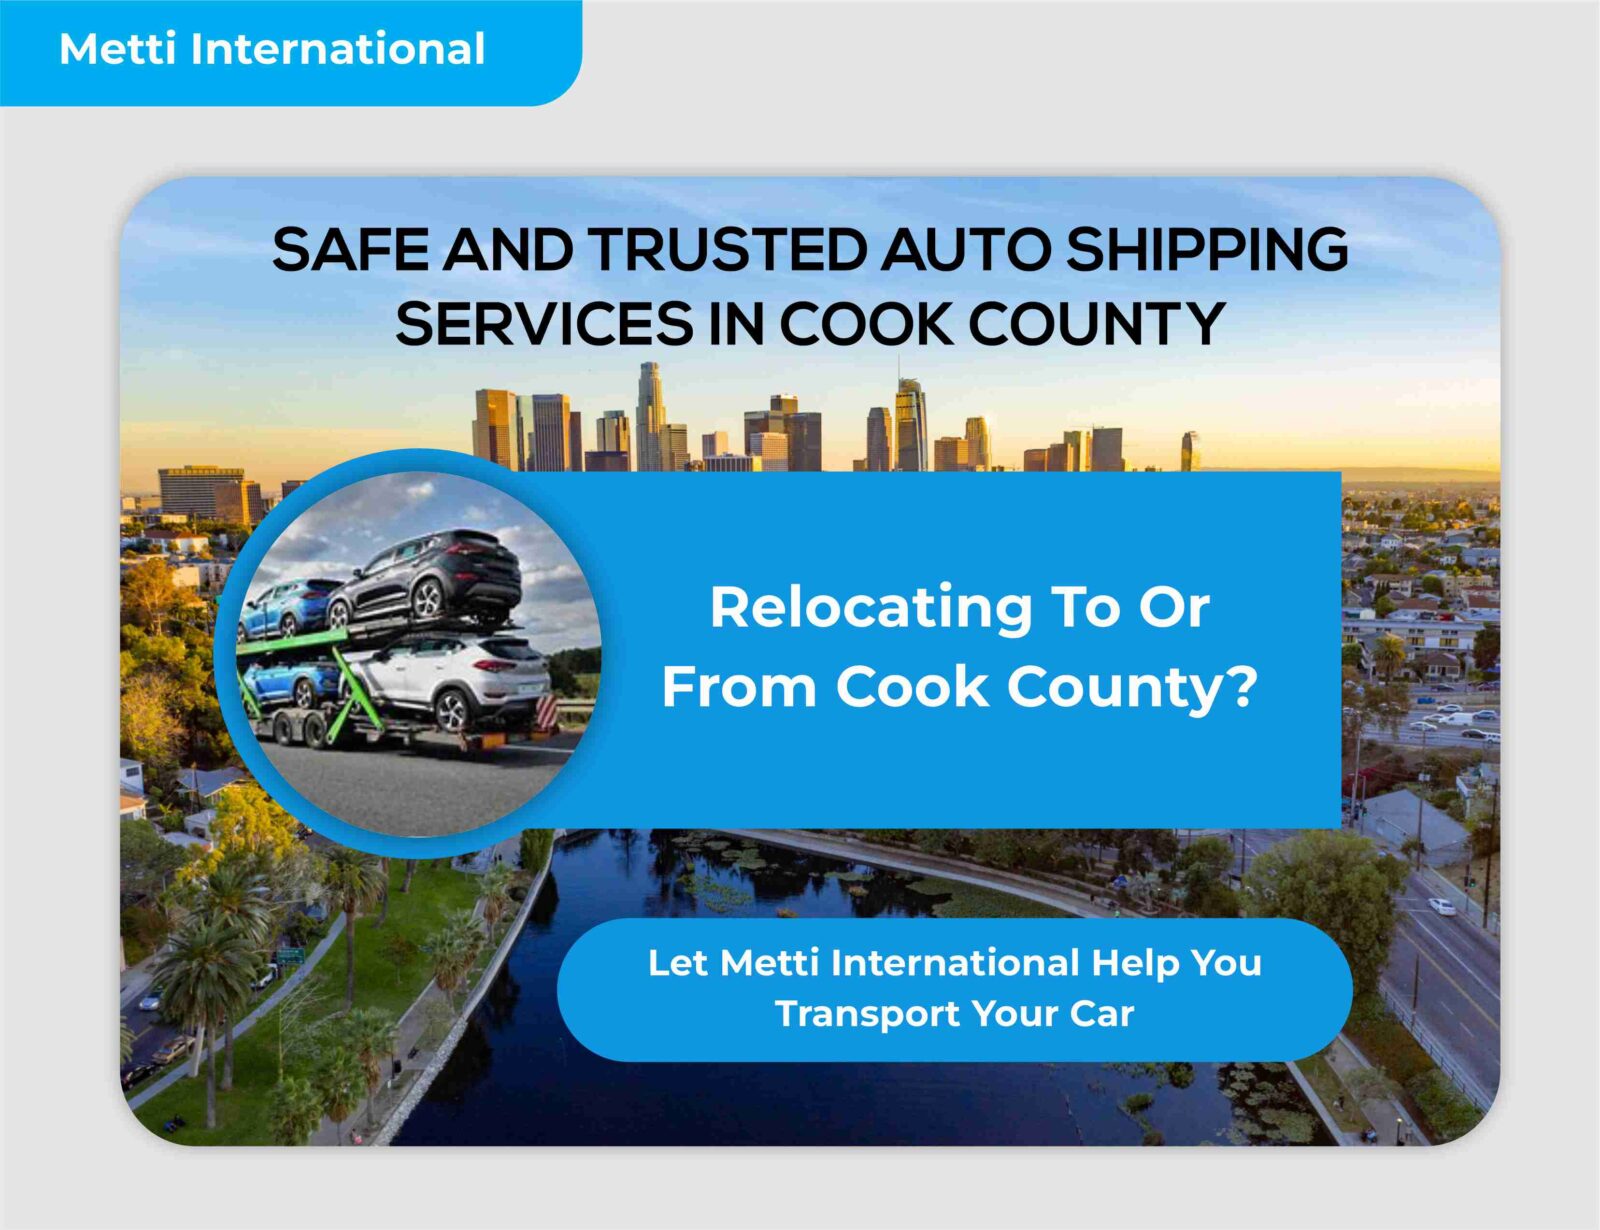 Cook-County-Auto-Transport